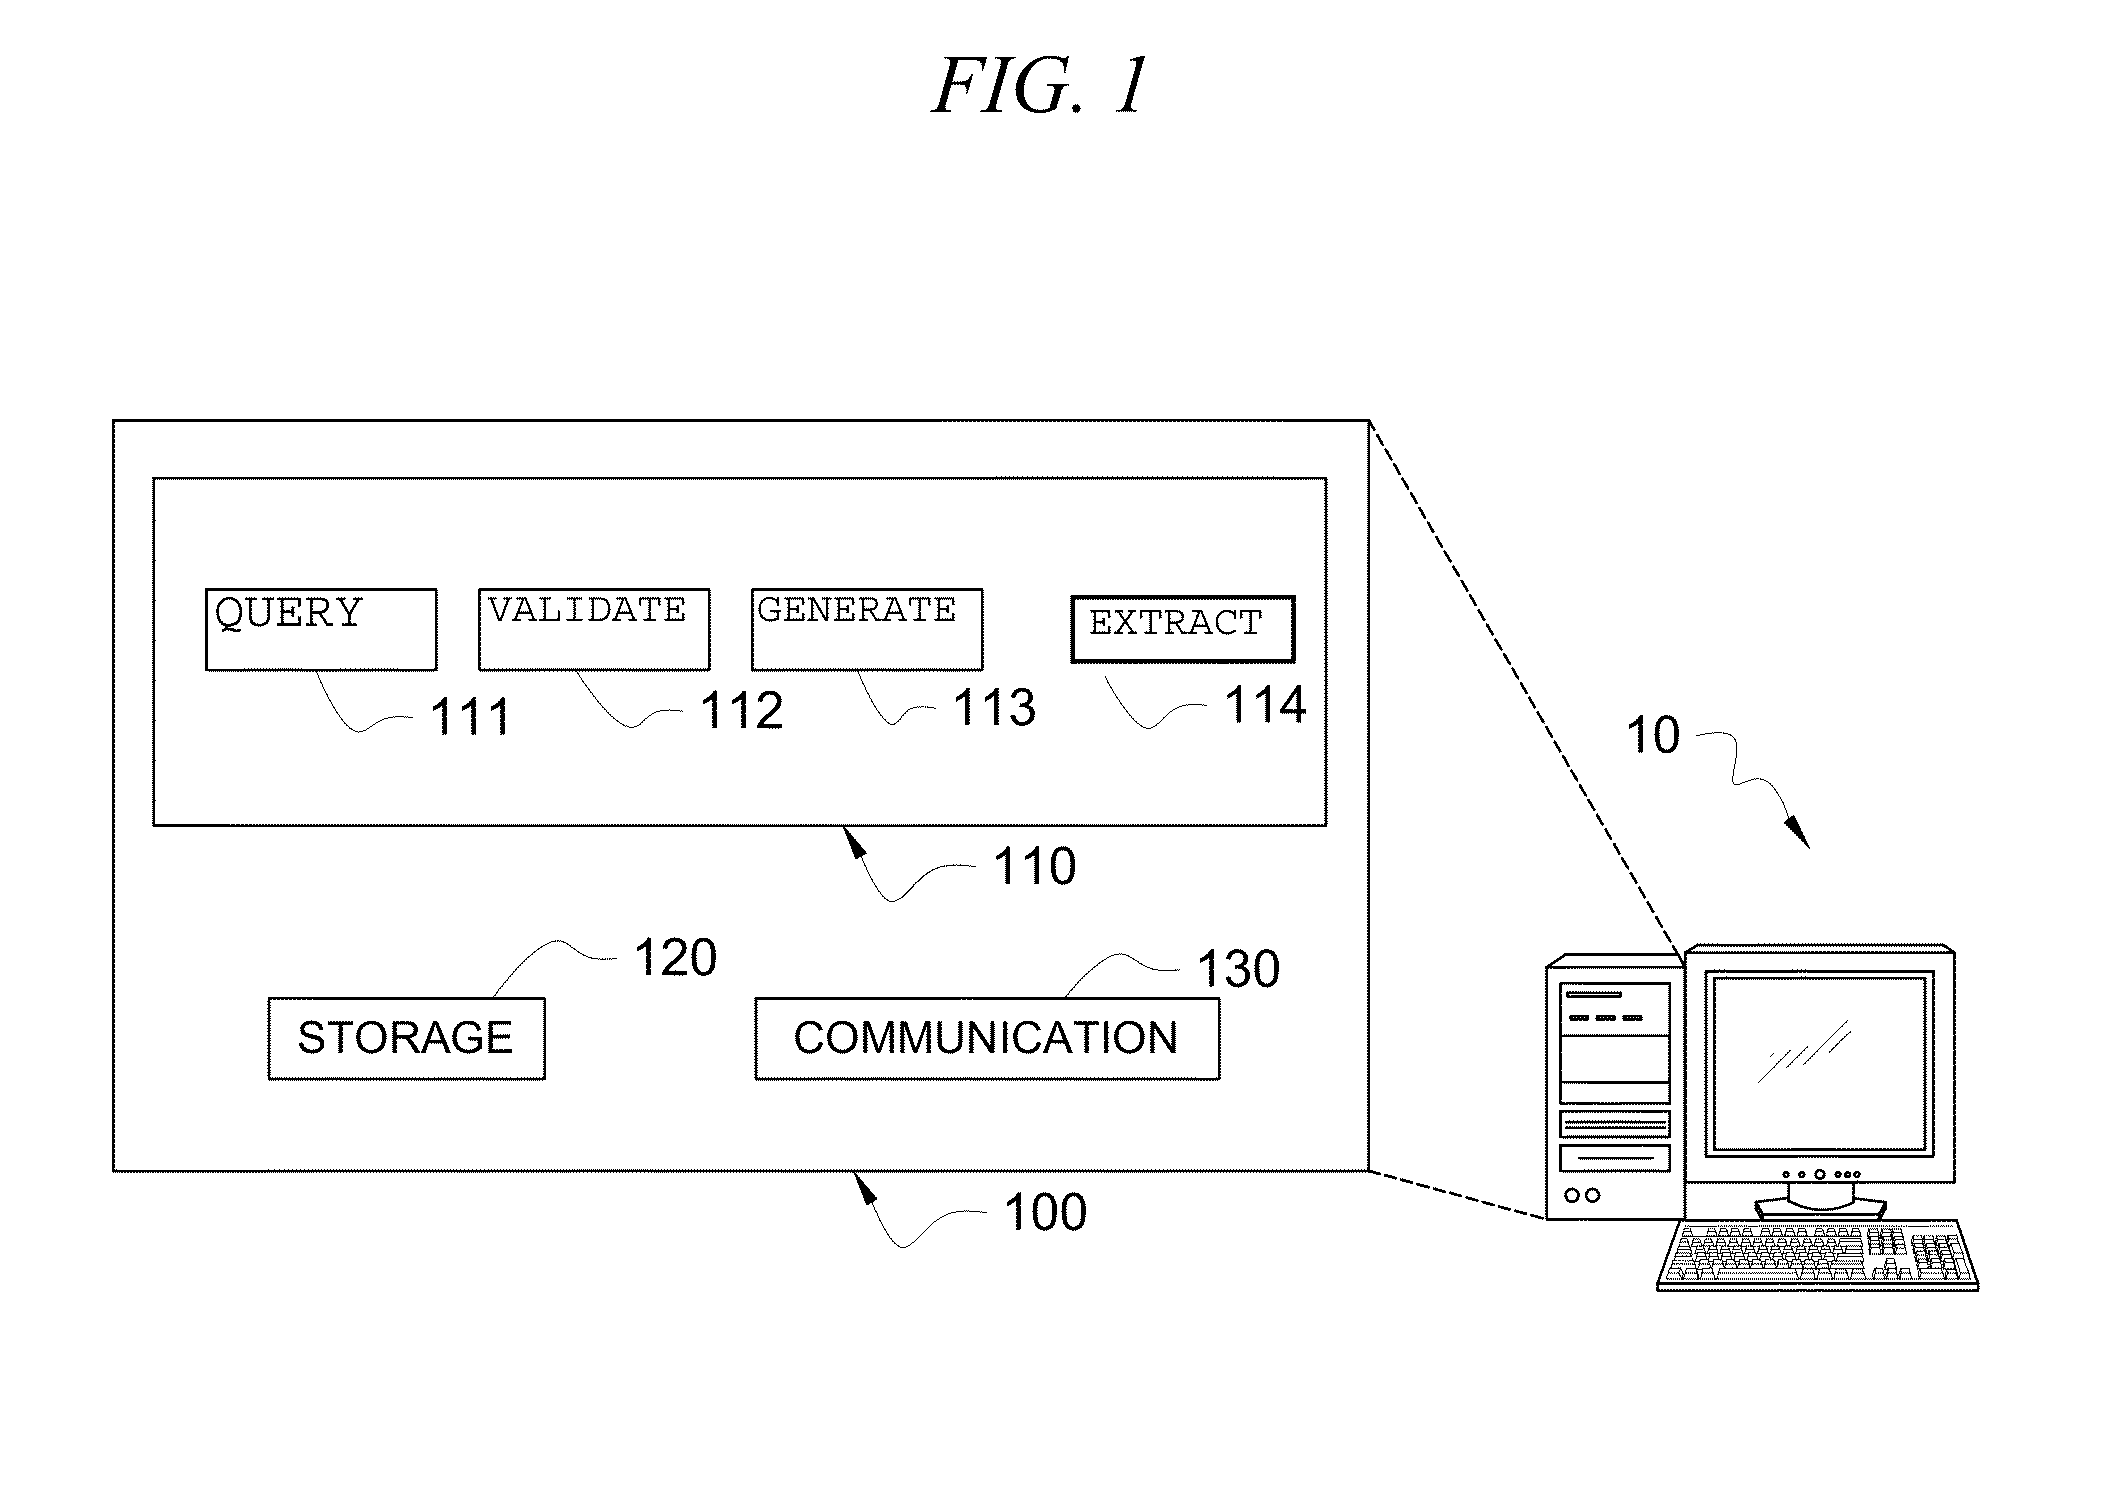 System and method for analyzing and comparing data and using analyzed data to identify liability sources